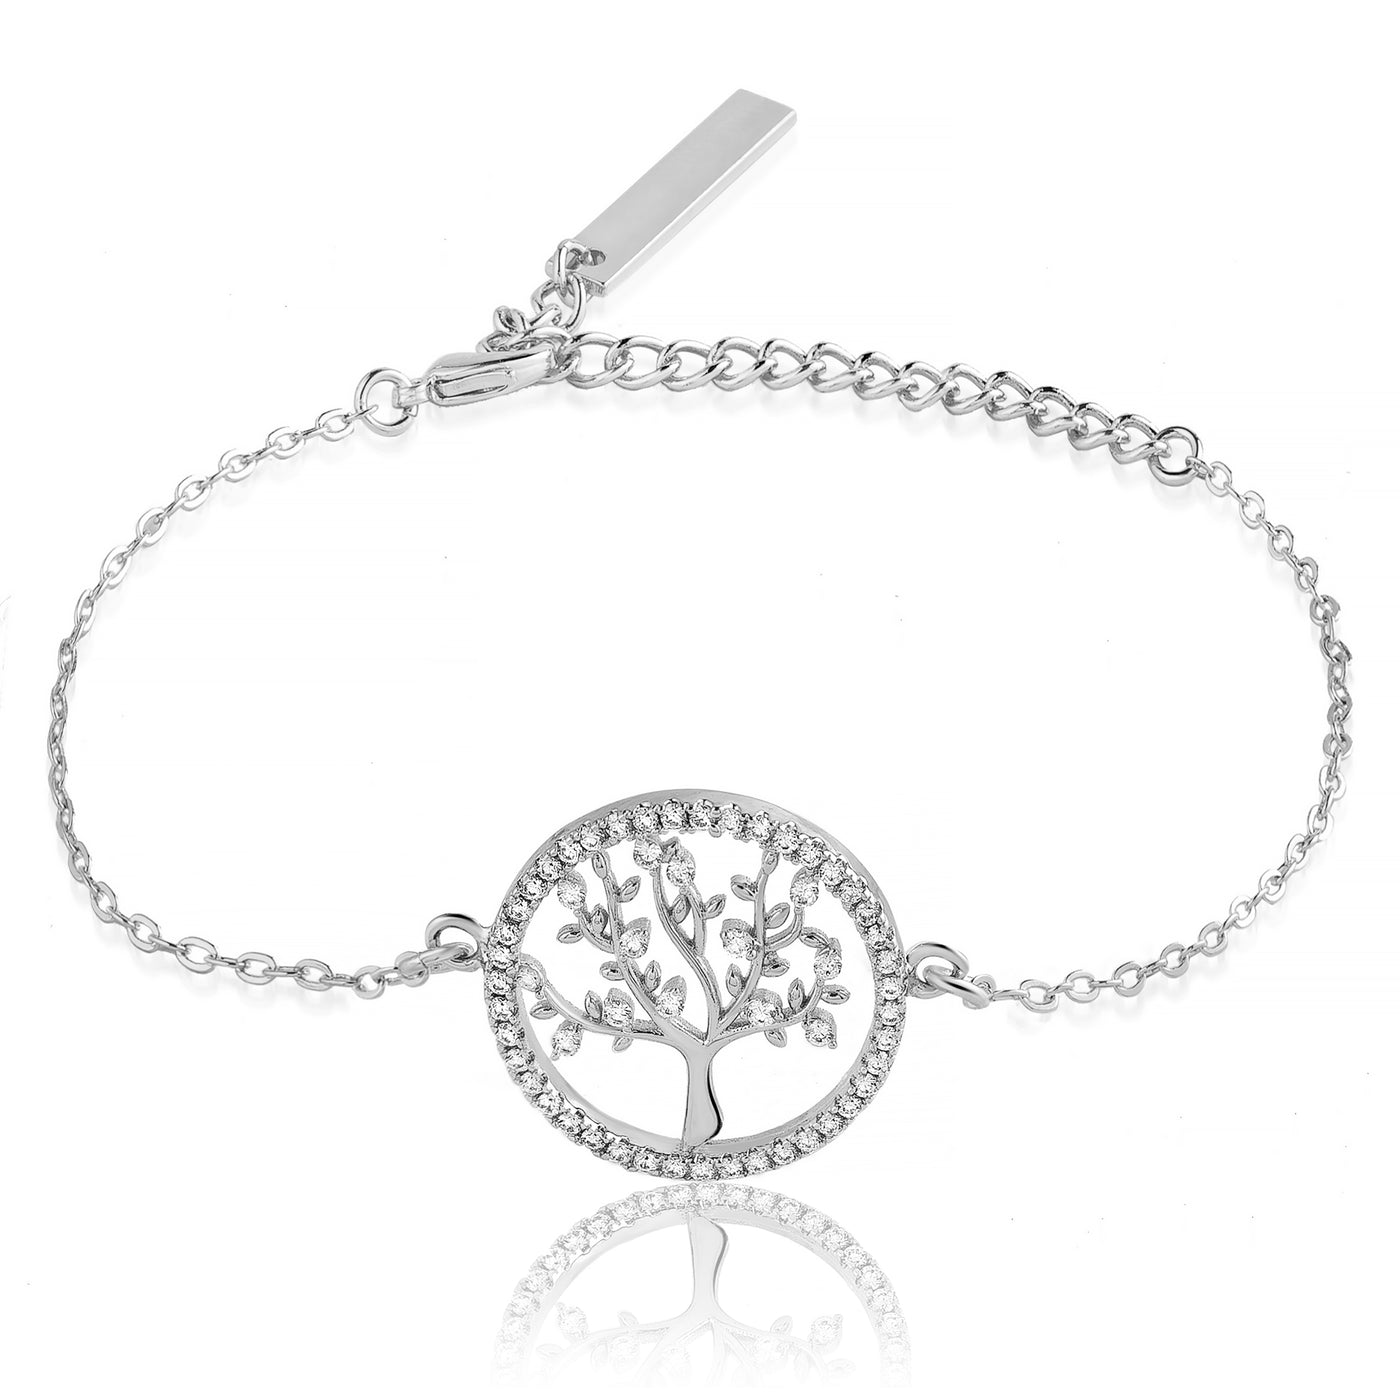 Tree of Life Bracelet in Classic and Luxurious Design - Judy